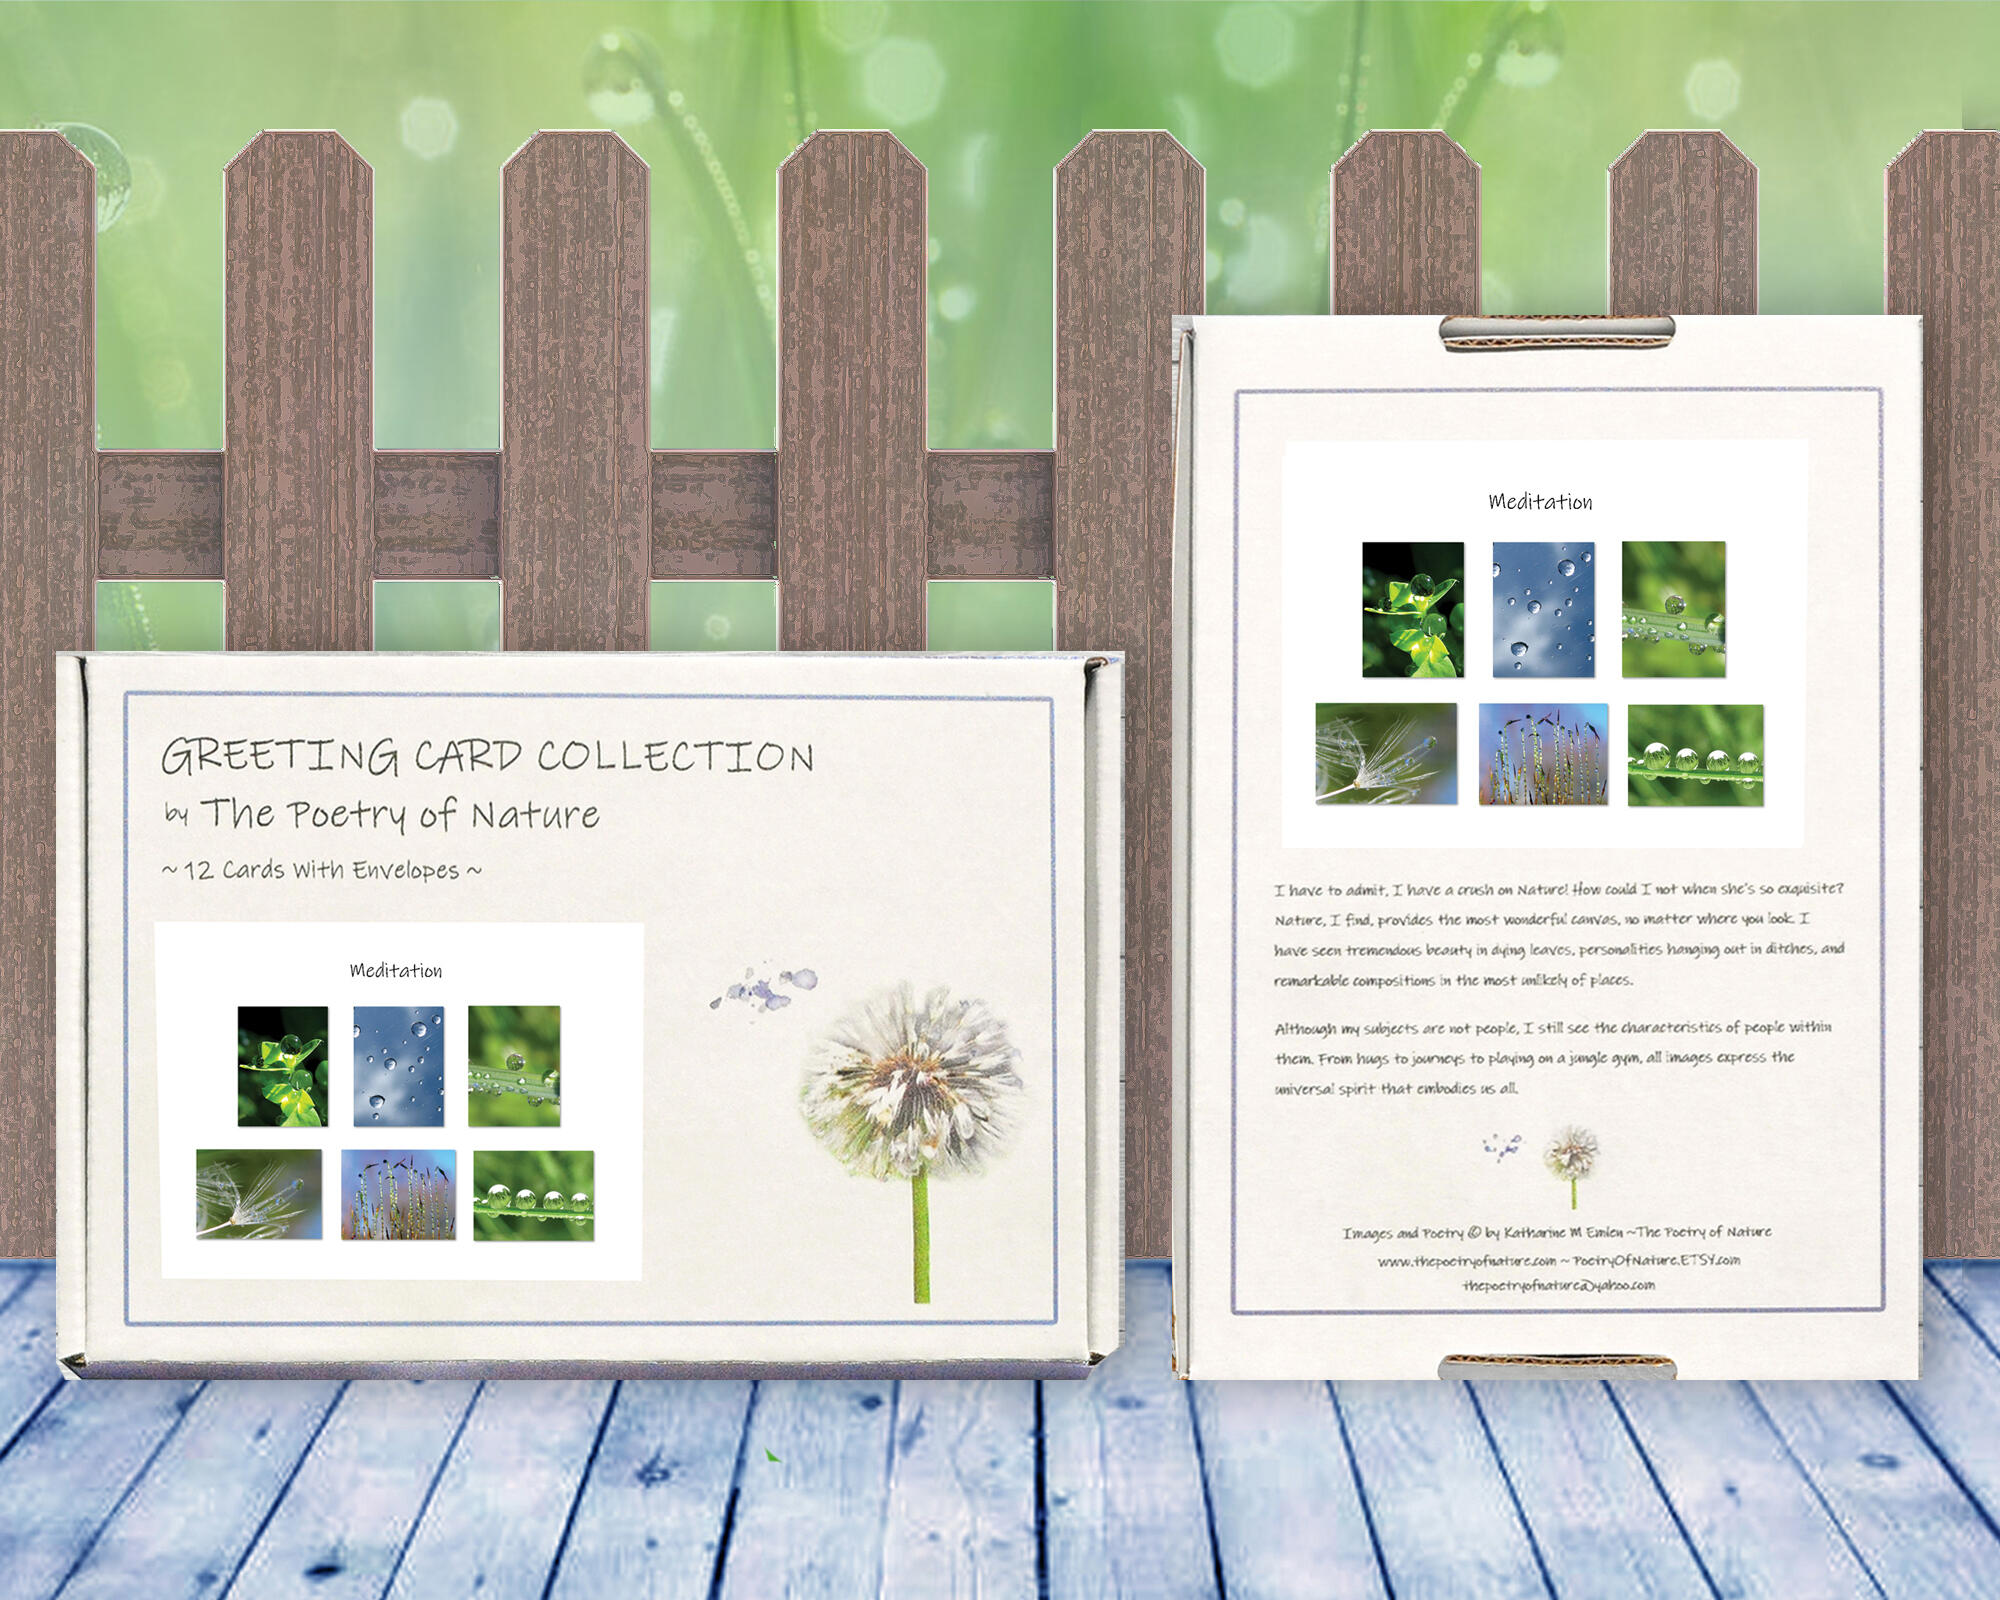 Meditation - Greeting Card Collection by The Poetry of Nature